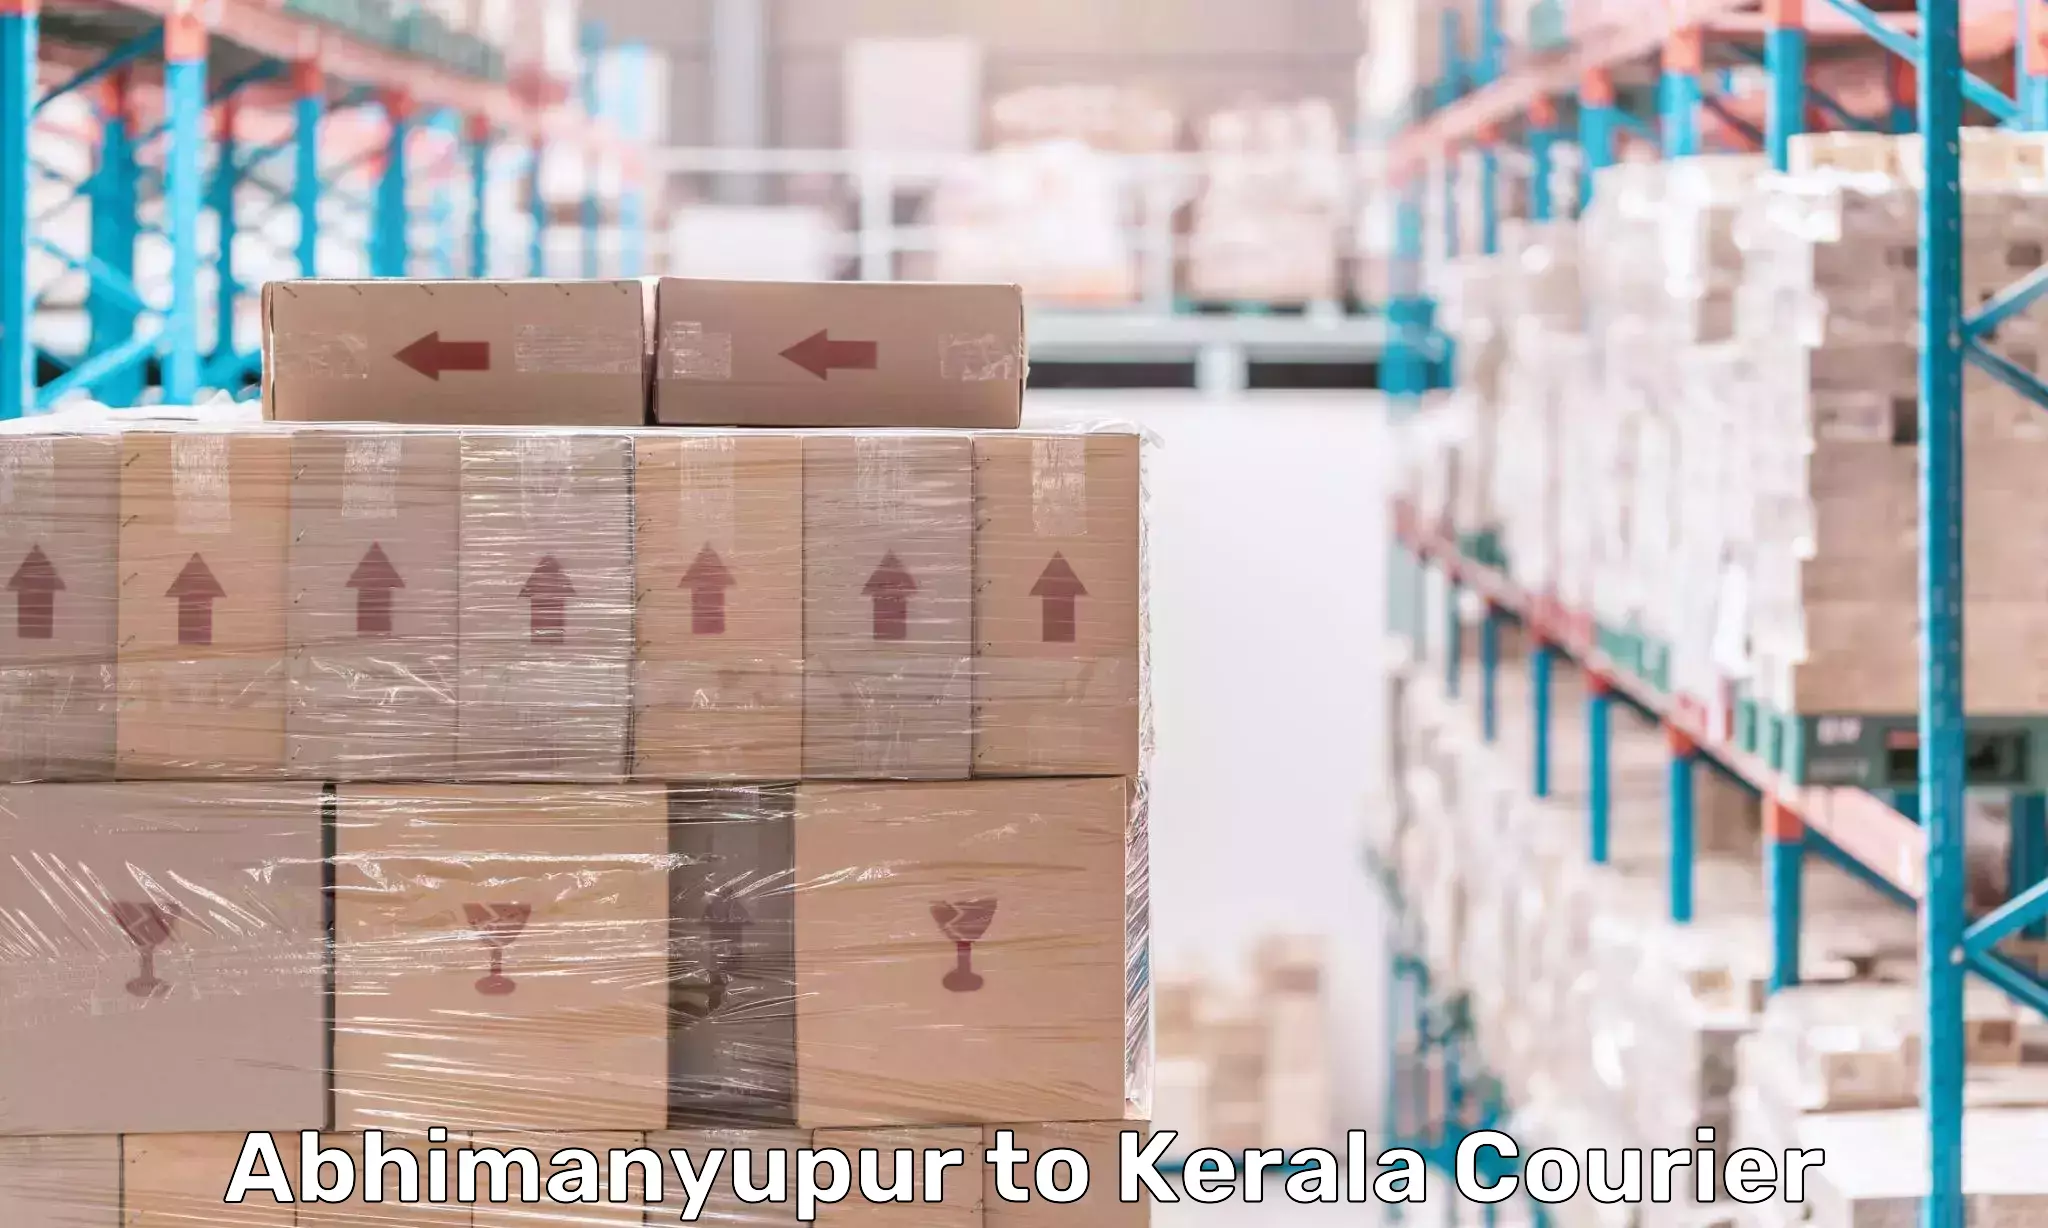 Full-service courier options Abhimanyupur to Kerala